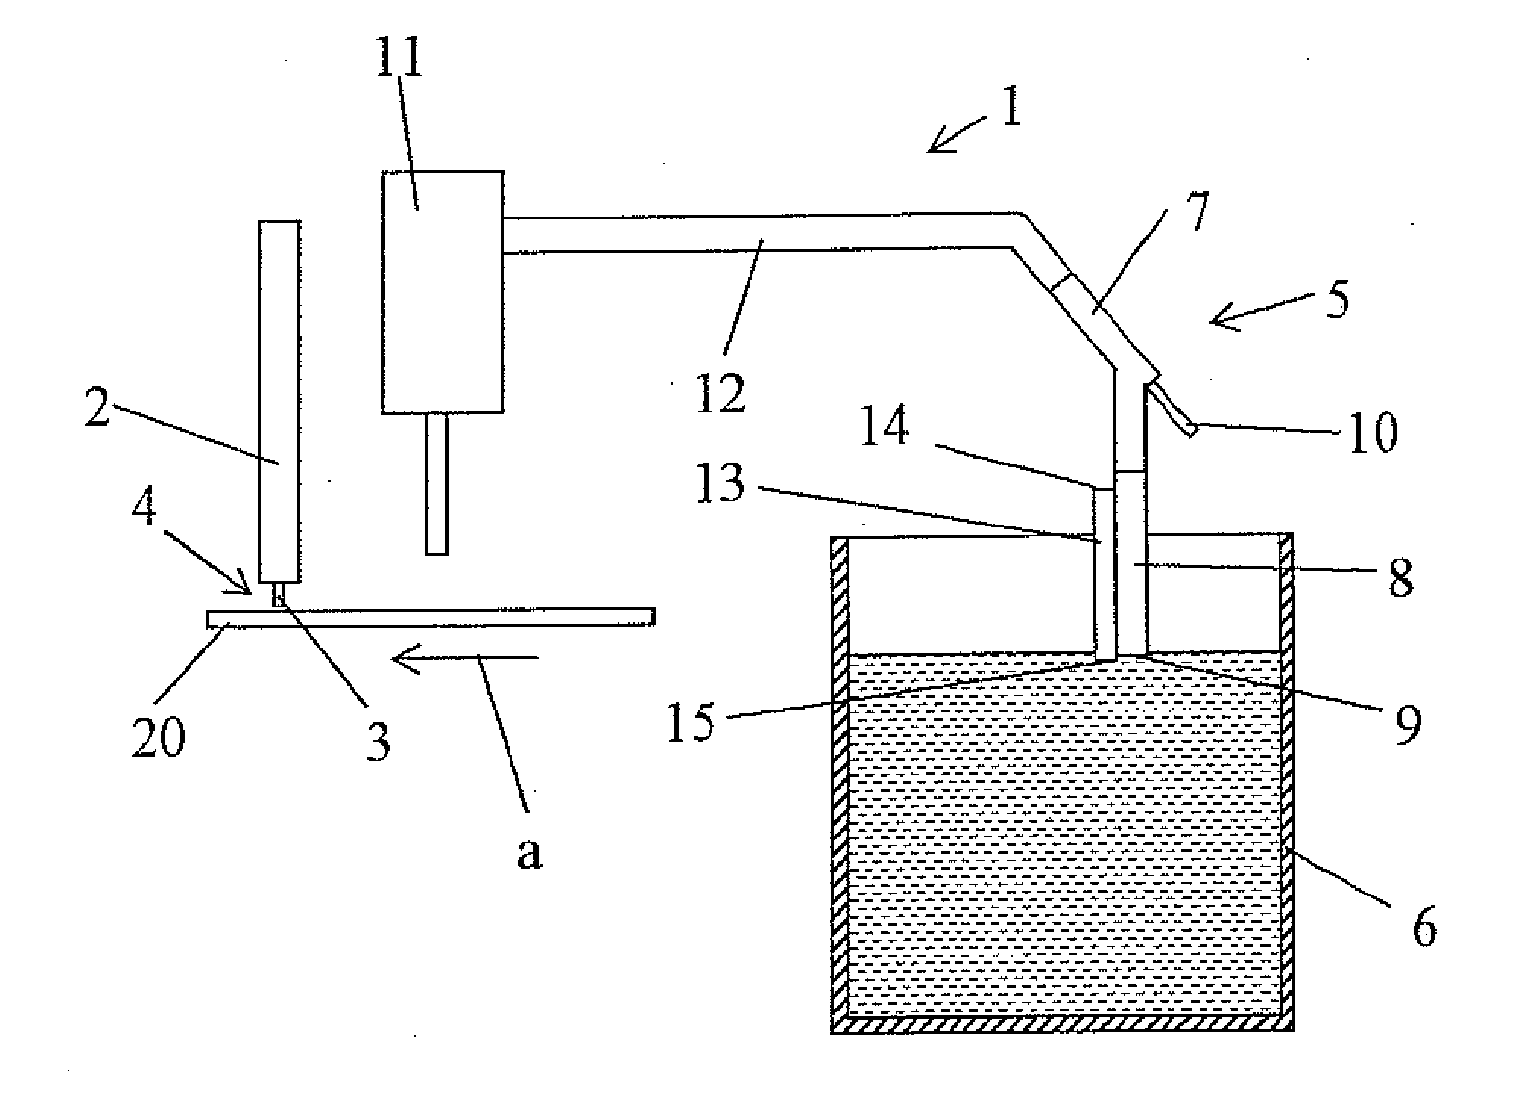 Device for handling powder for a welding apparatus